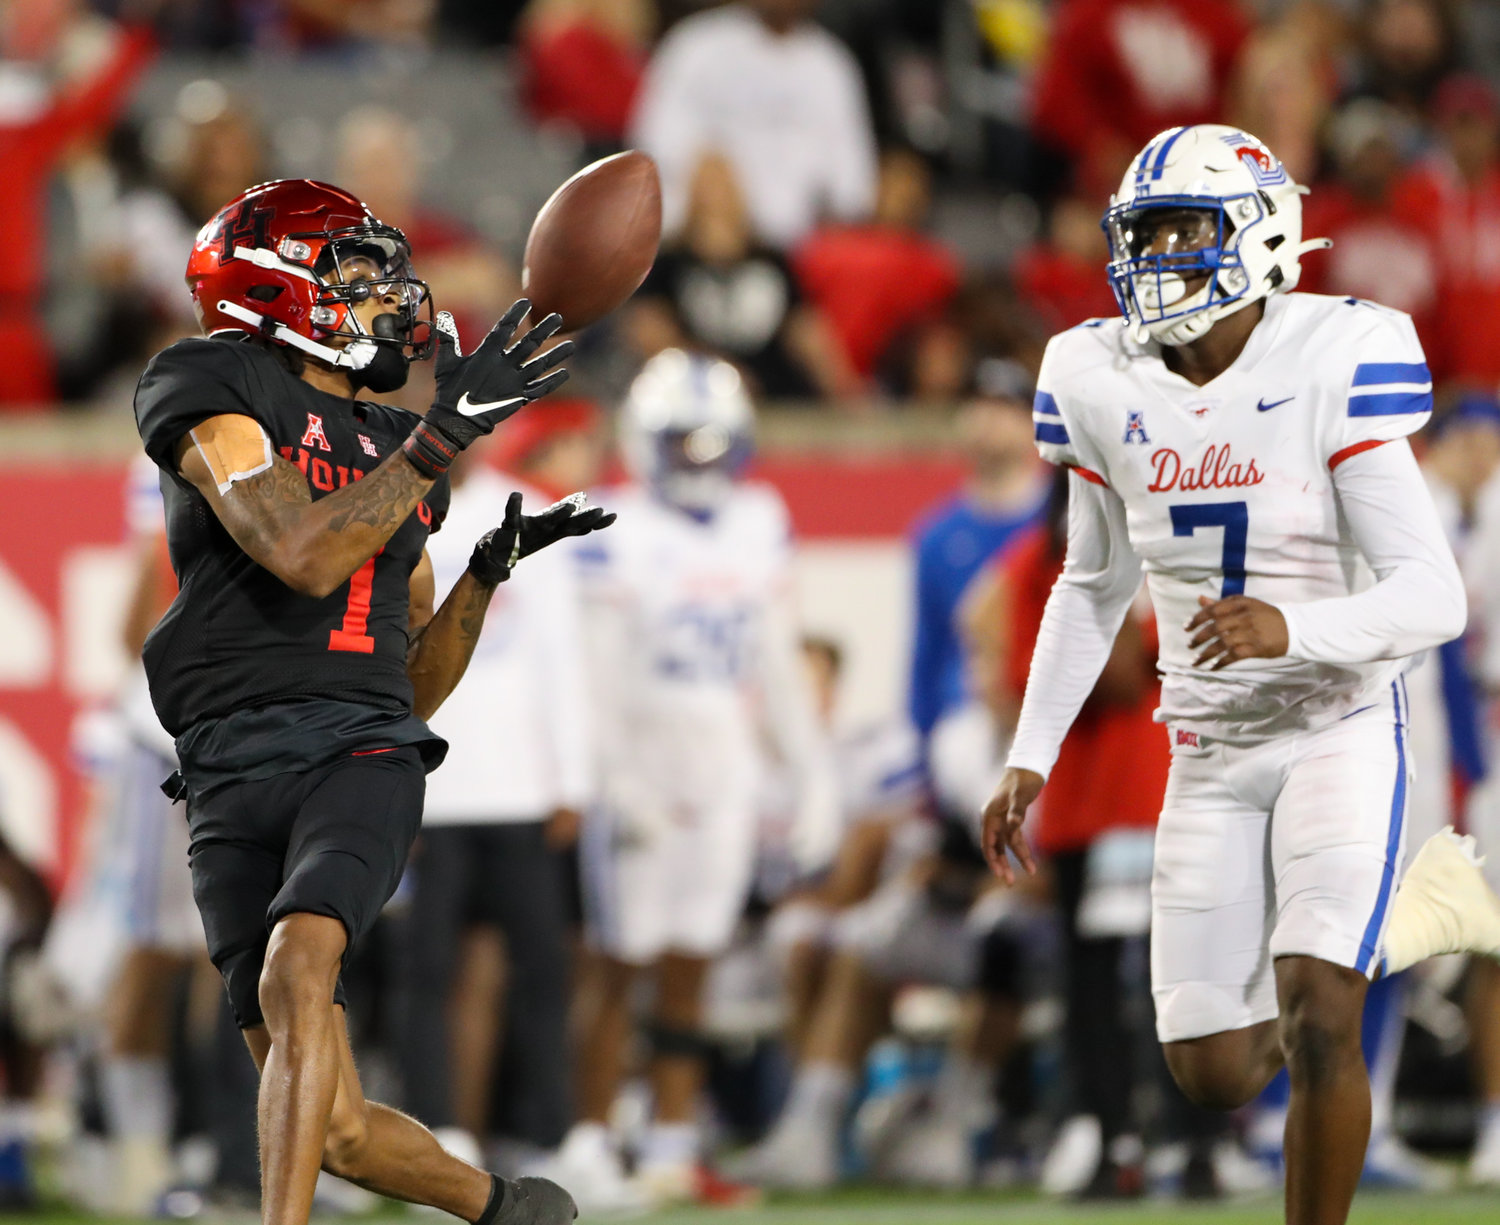 Houston Cougars wide receiver Nathaniel Dell (1) makes a catch during an NCAA football game between Houston and SMU on October 30, 2021 in Houston, Texas.